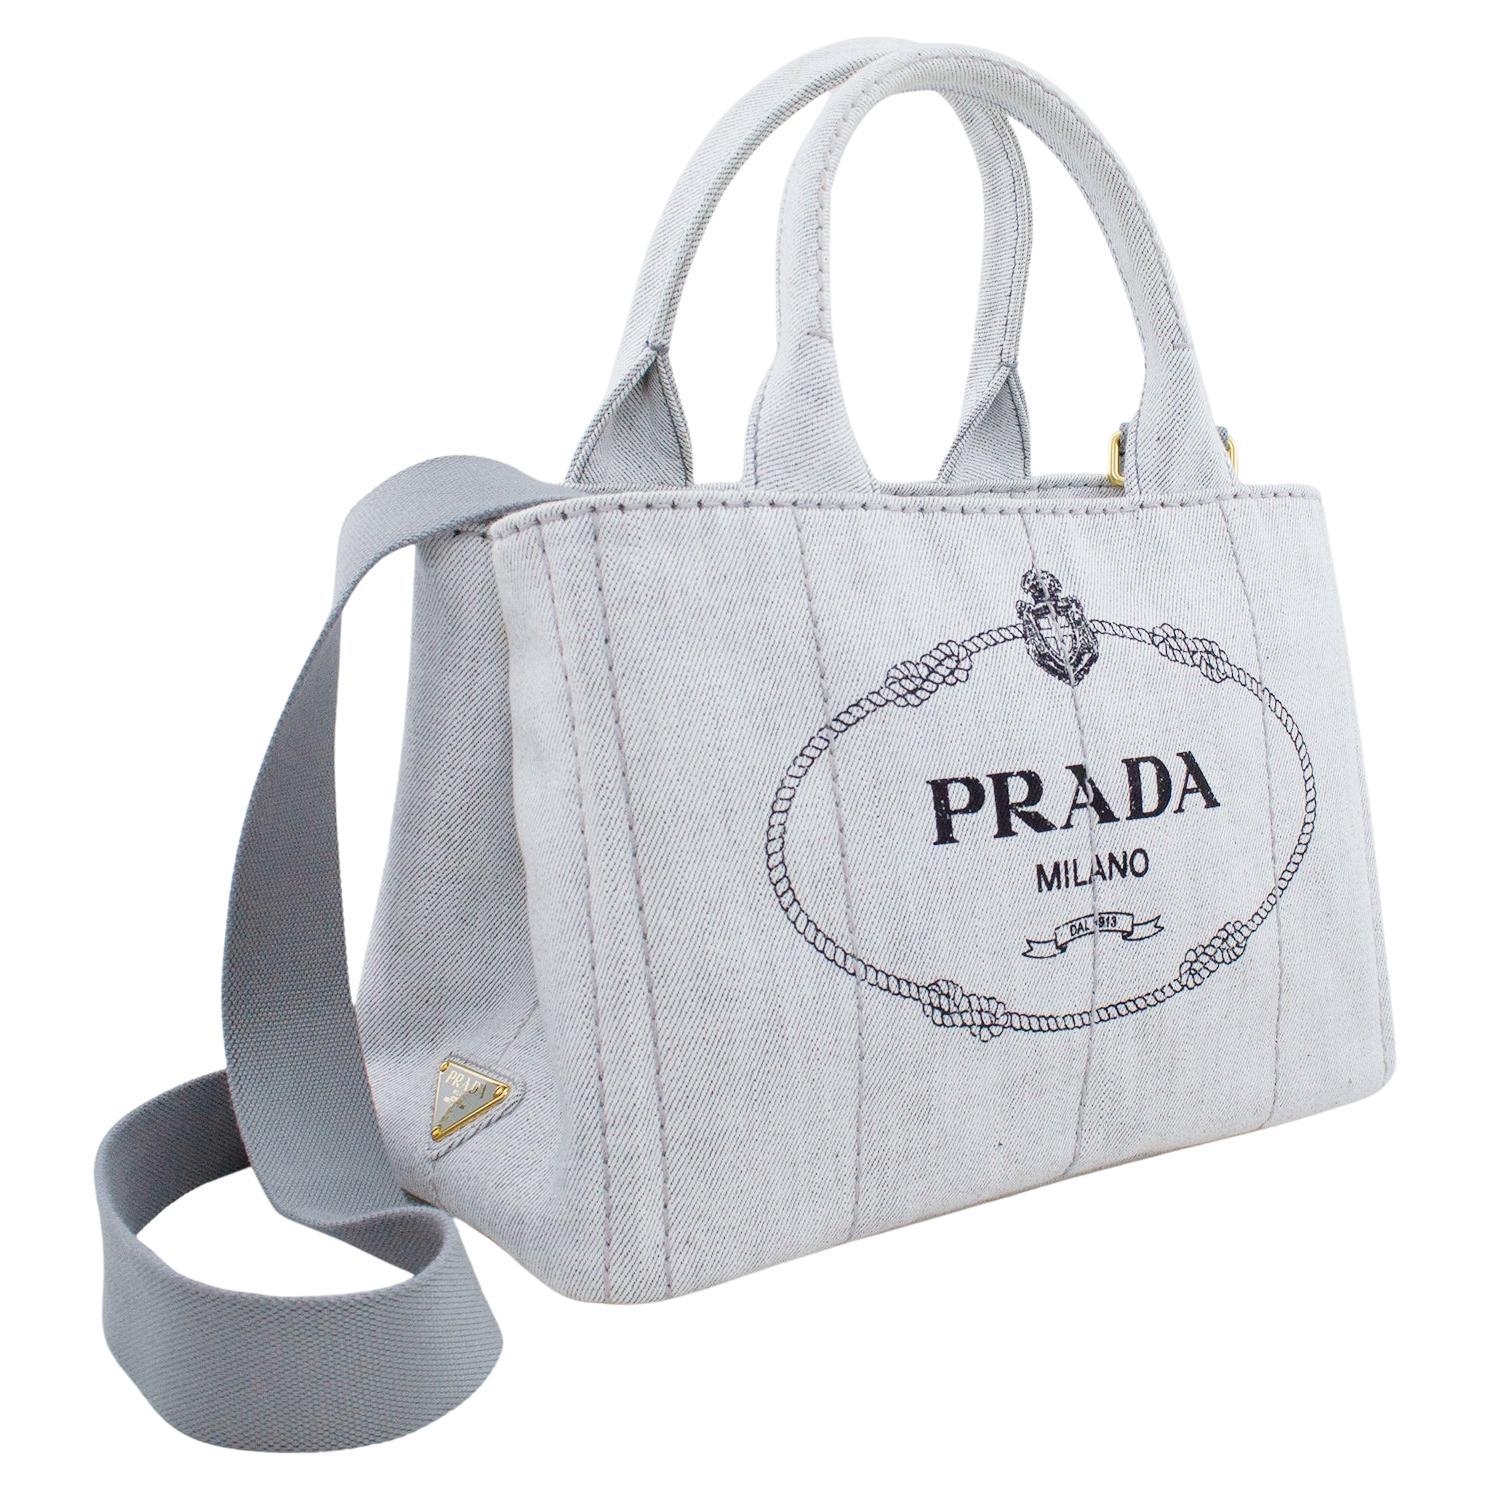 This current Prada tote bag was inspired by vintage gardener's bags. White denim printed with a silk-screen logo and embellished with brass-finish hardware, it offers three practical internal pockets and a detachable shoulder strap. Excellent